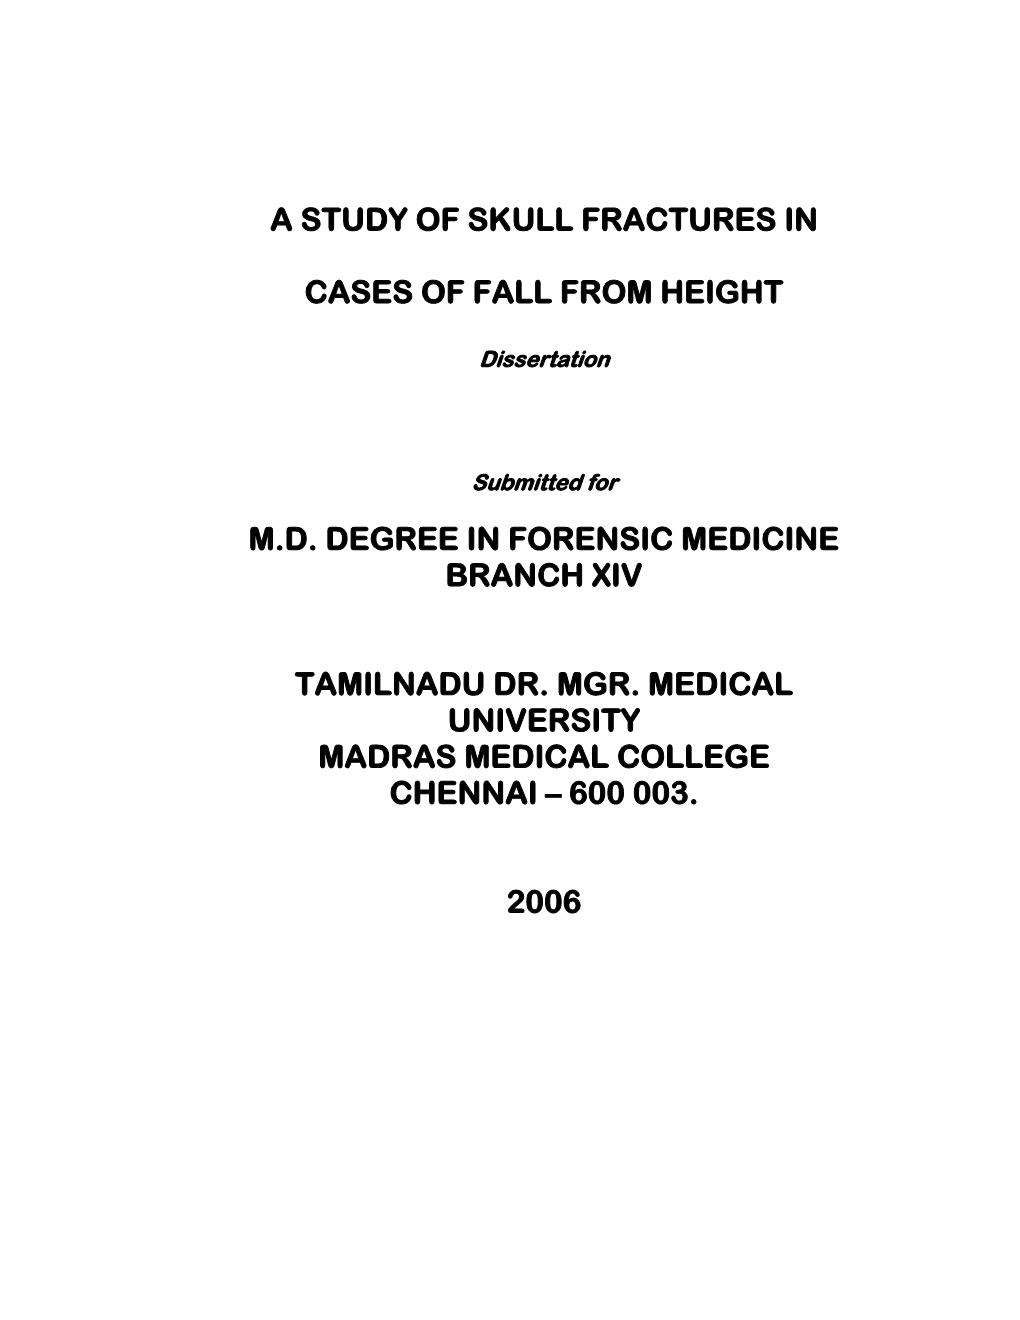 A Study of Skull Fractures in Cases of Fall from Height